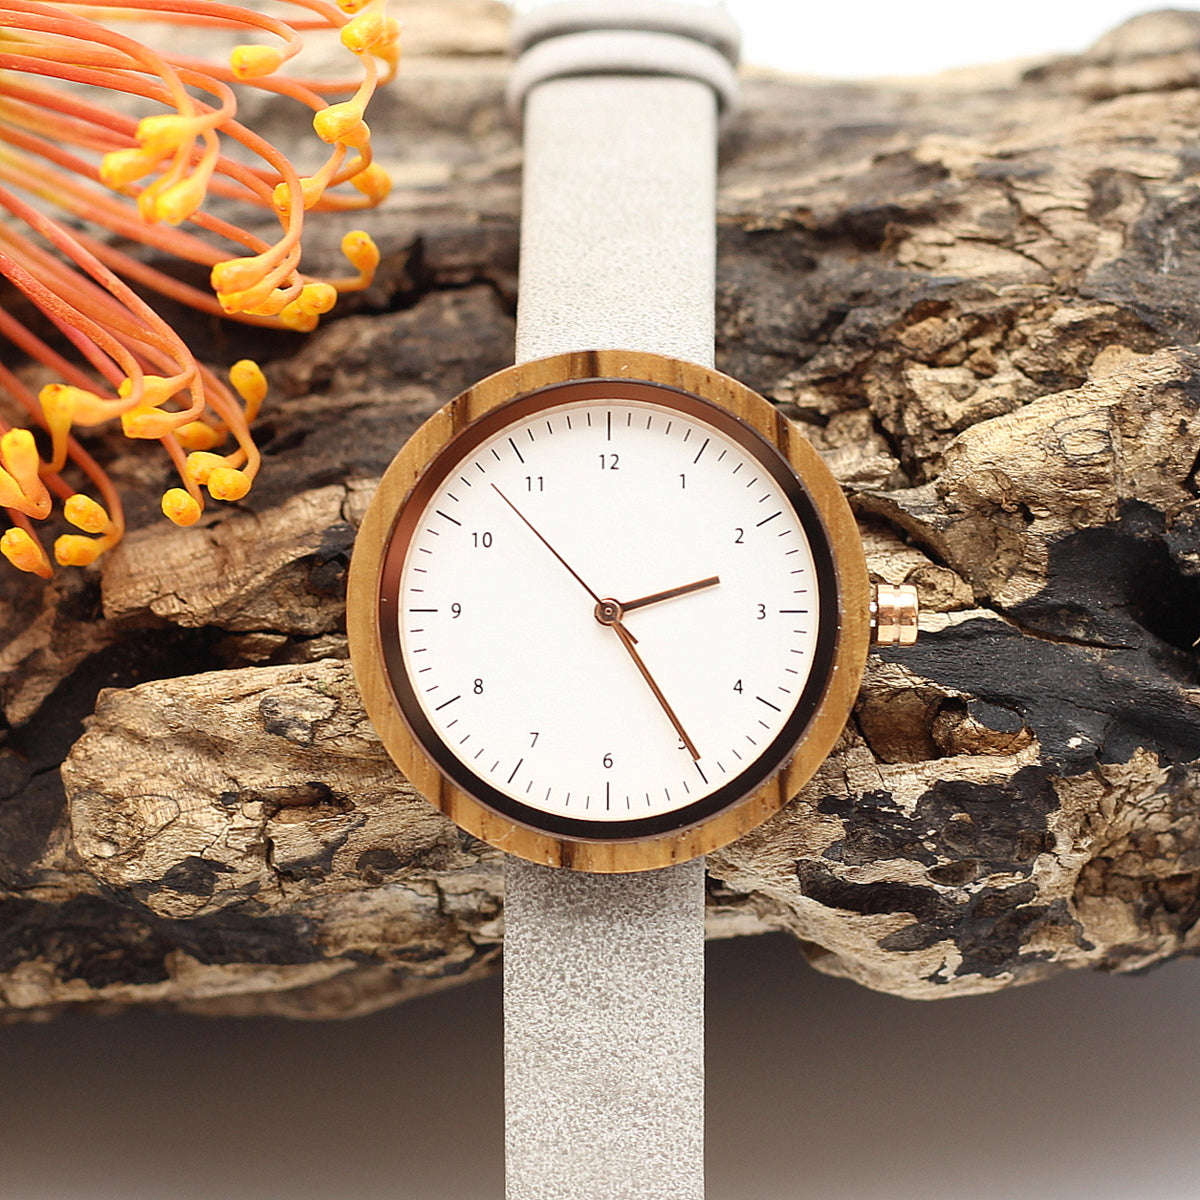 Kanso CUTIE Round Petite Wooden Watch zebra wood with vegan leather grey strap, make it personal and engrave a message on the back. Shipping only R59.